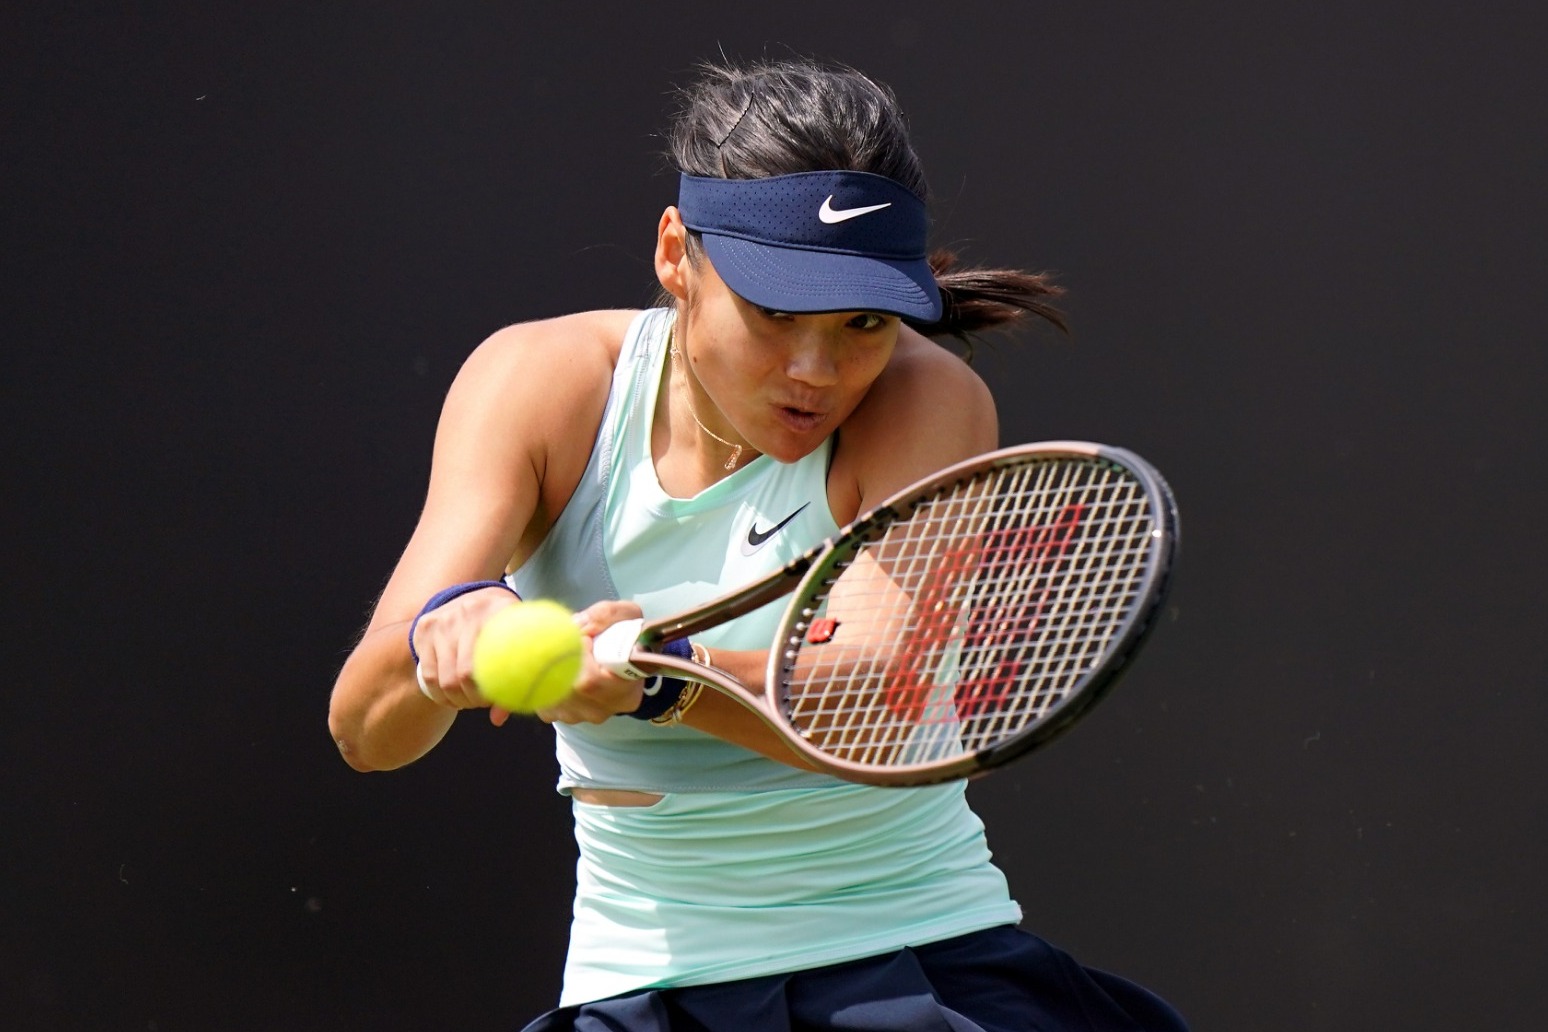 Emma Raducanu seeded 10th for this summer’s Wimbledon Championships 